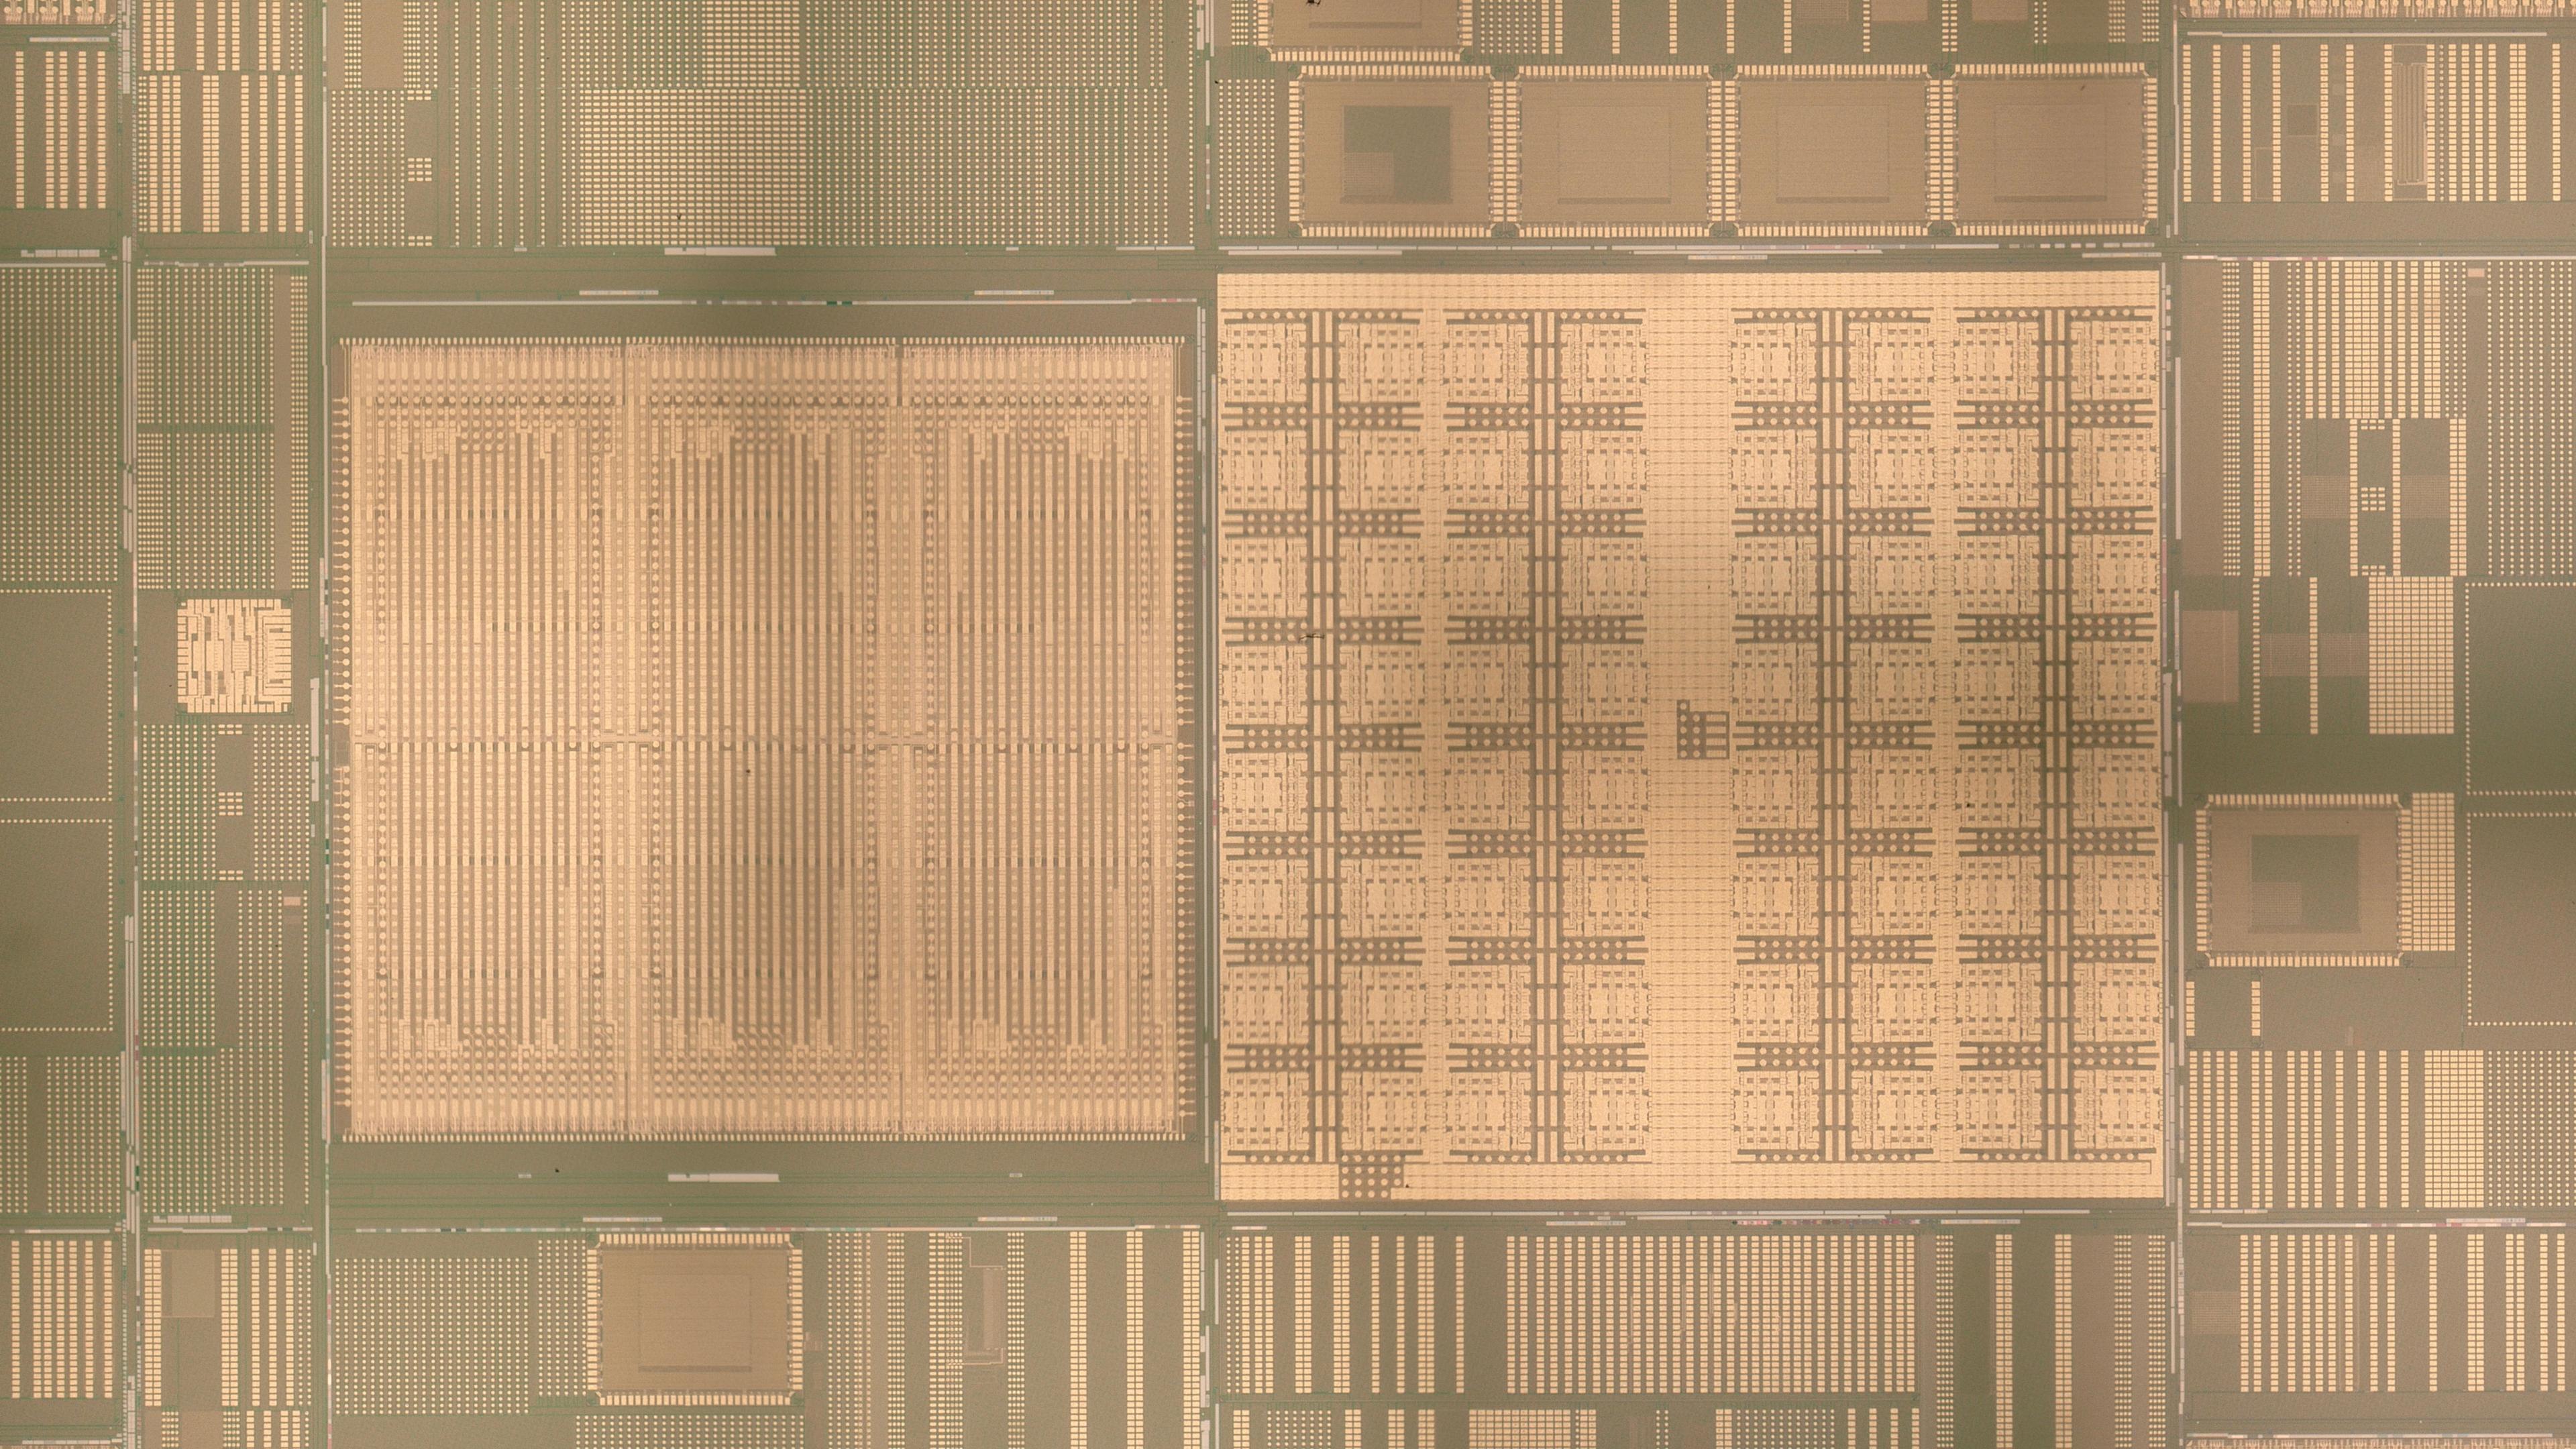 Analog AI Research chips used by IBM.